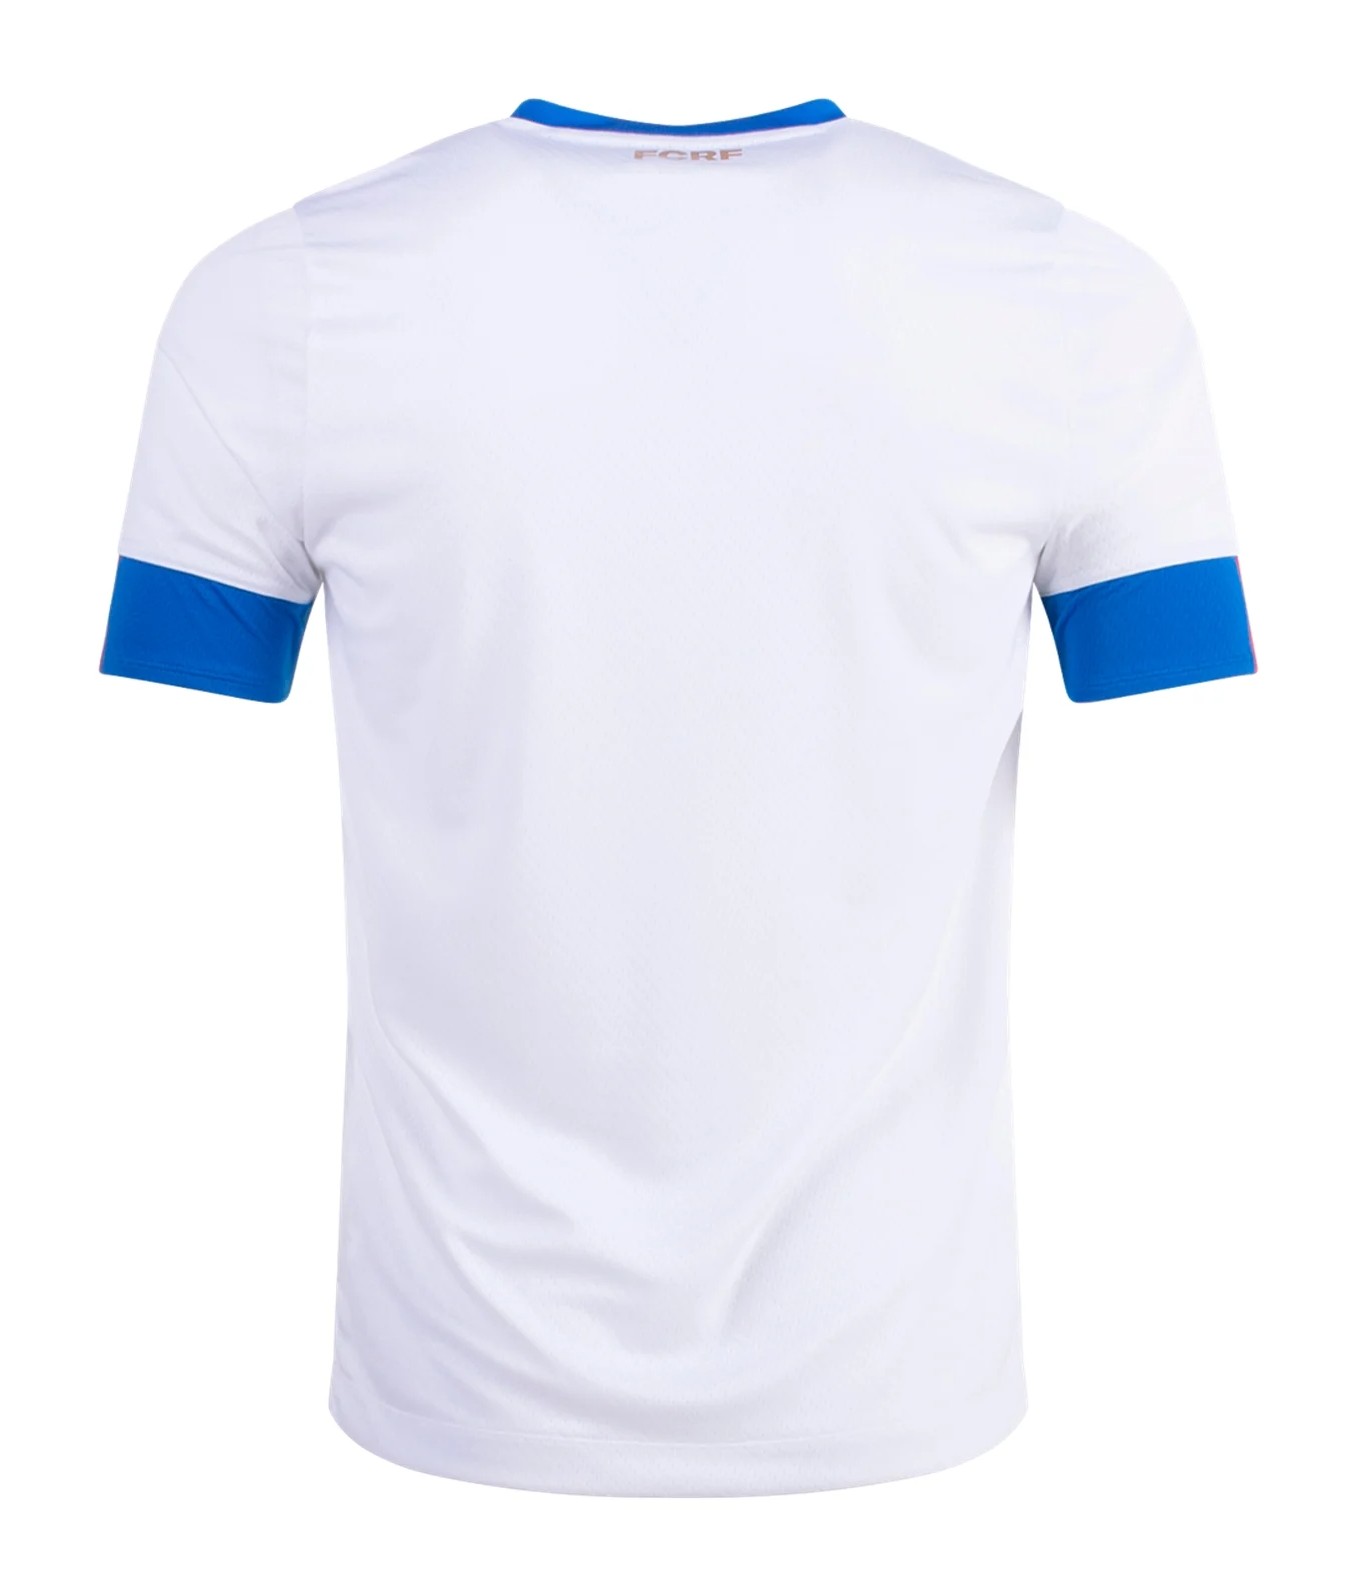 Costa Rica World Cup 2022 Away Kit Back